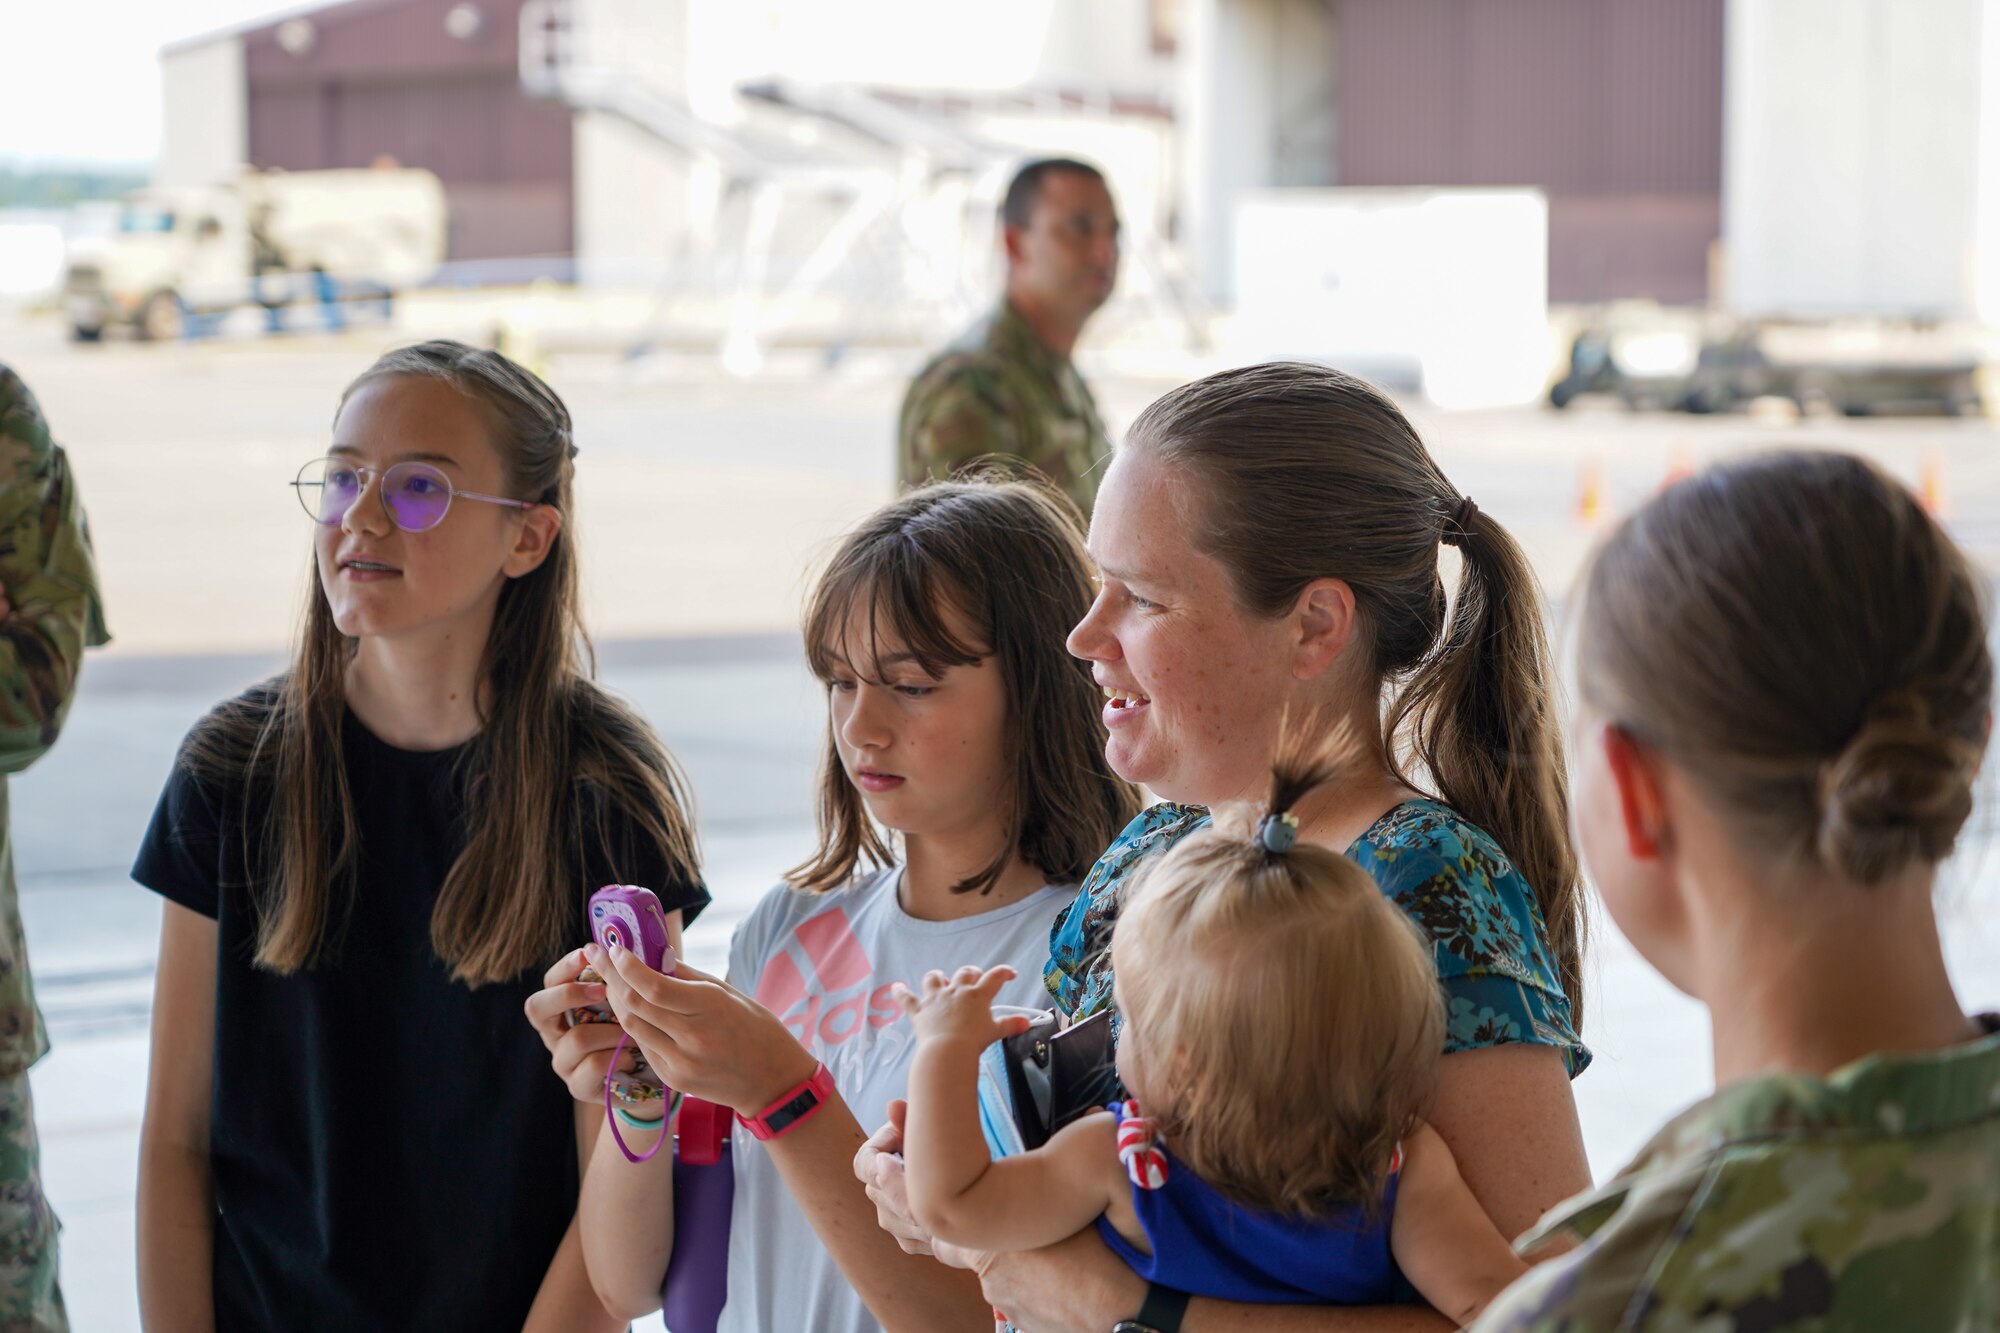 Leah Ketchum and her family admire a 142nd Wing F-15 Eagle that now displays her artwork on its nose on August 12, 2021 in Portland, Ore. The 142nd Wing and the 173rd Fighter Wing both held contests in support of Month of the Military Child in which each wing chose one winner to have their designs applied to fighter jets at their respective wings. (U.S. Air National Guard Photo by Staff. Sgt. Alexander Frank)